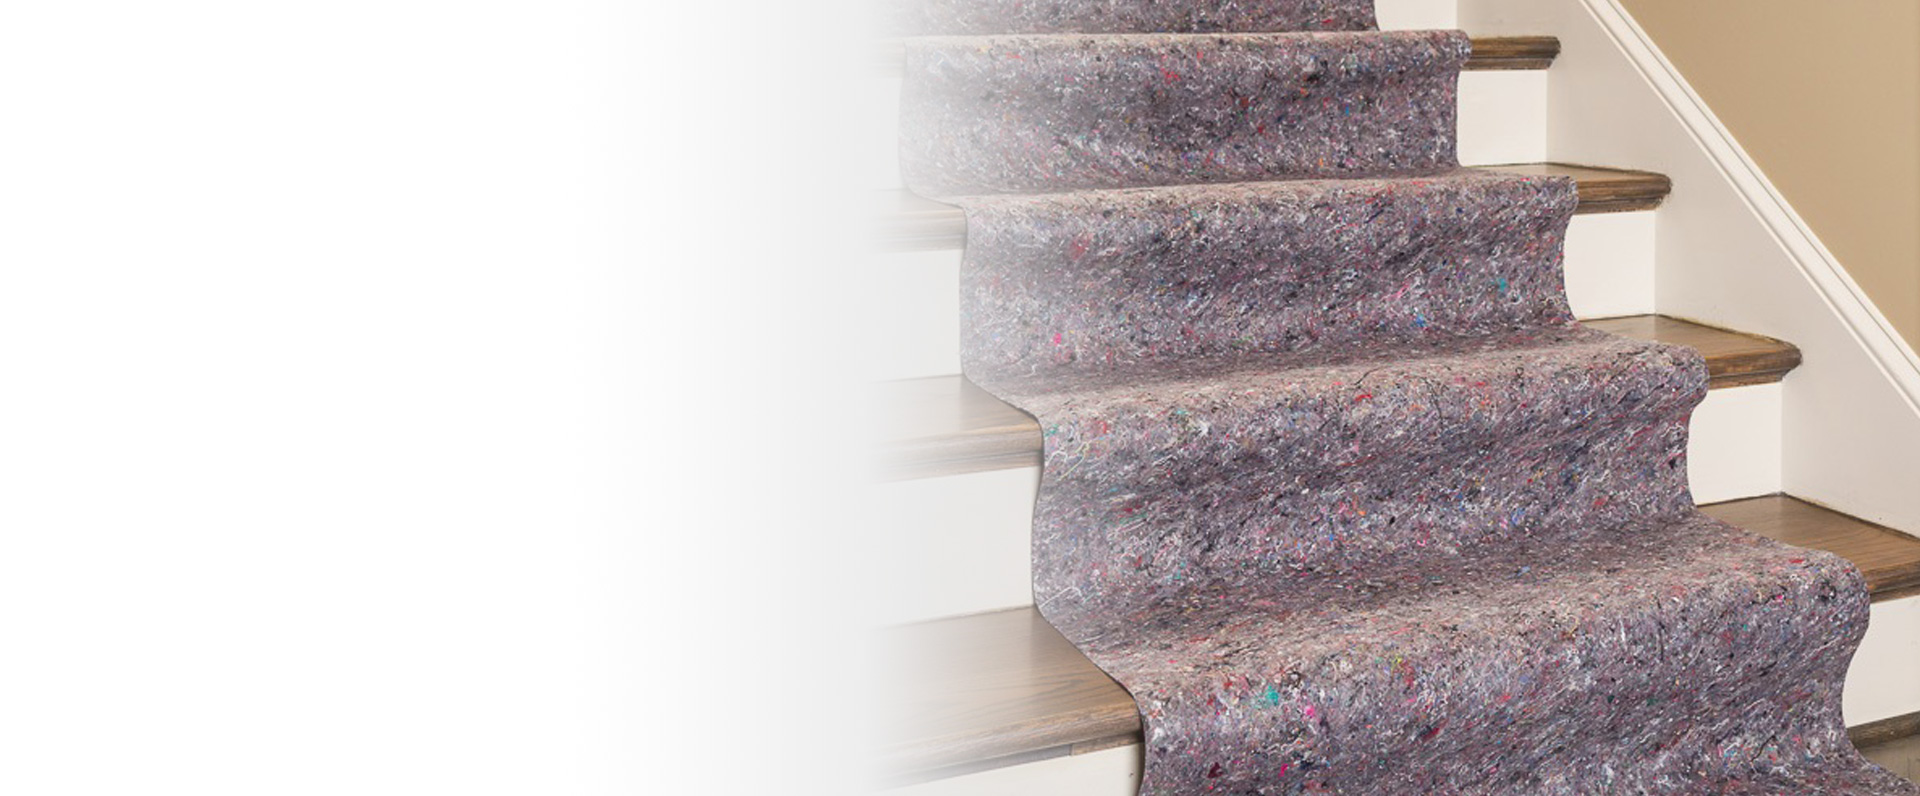 Clean&Safe skid-resistant drop cloths provide excellent stair protection during renovation or construction.